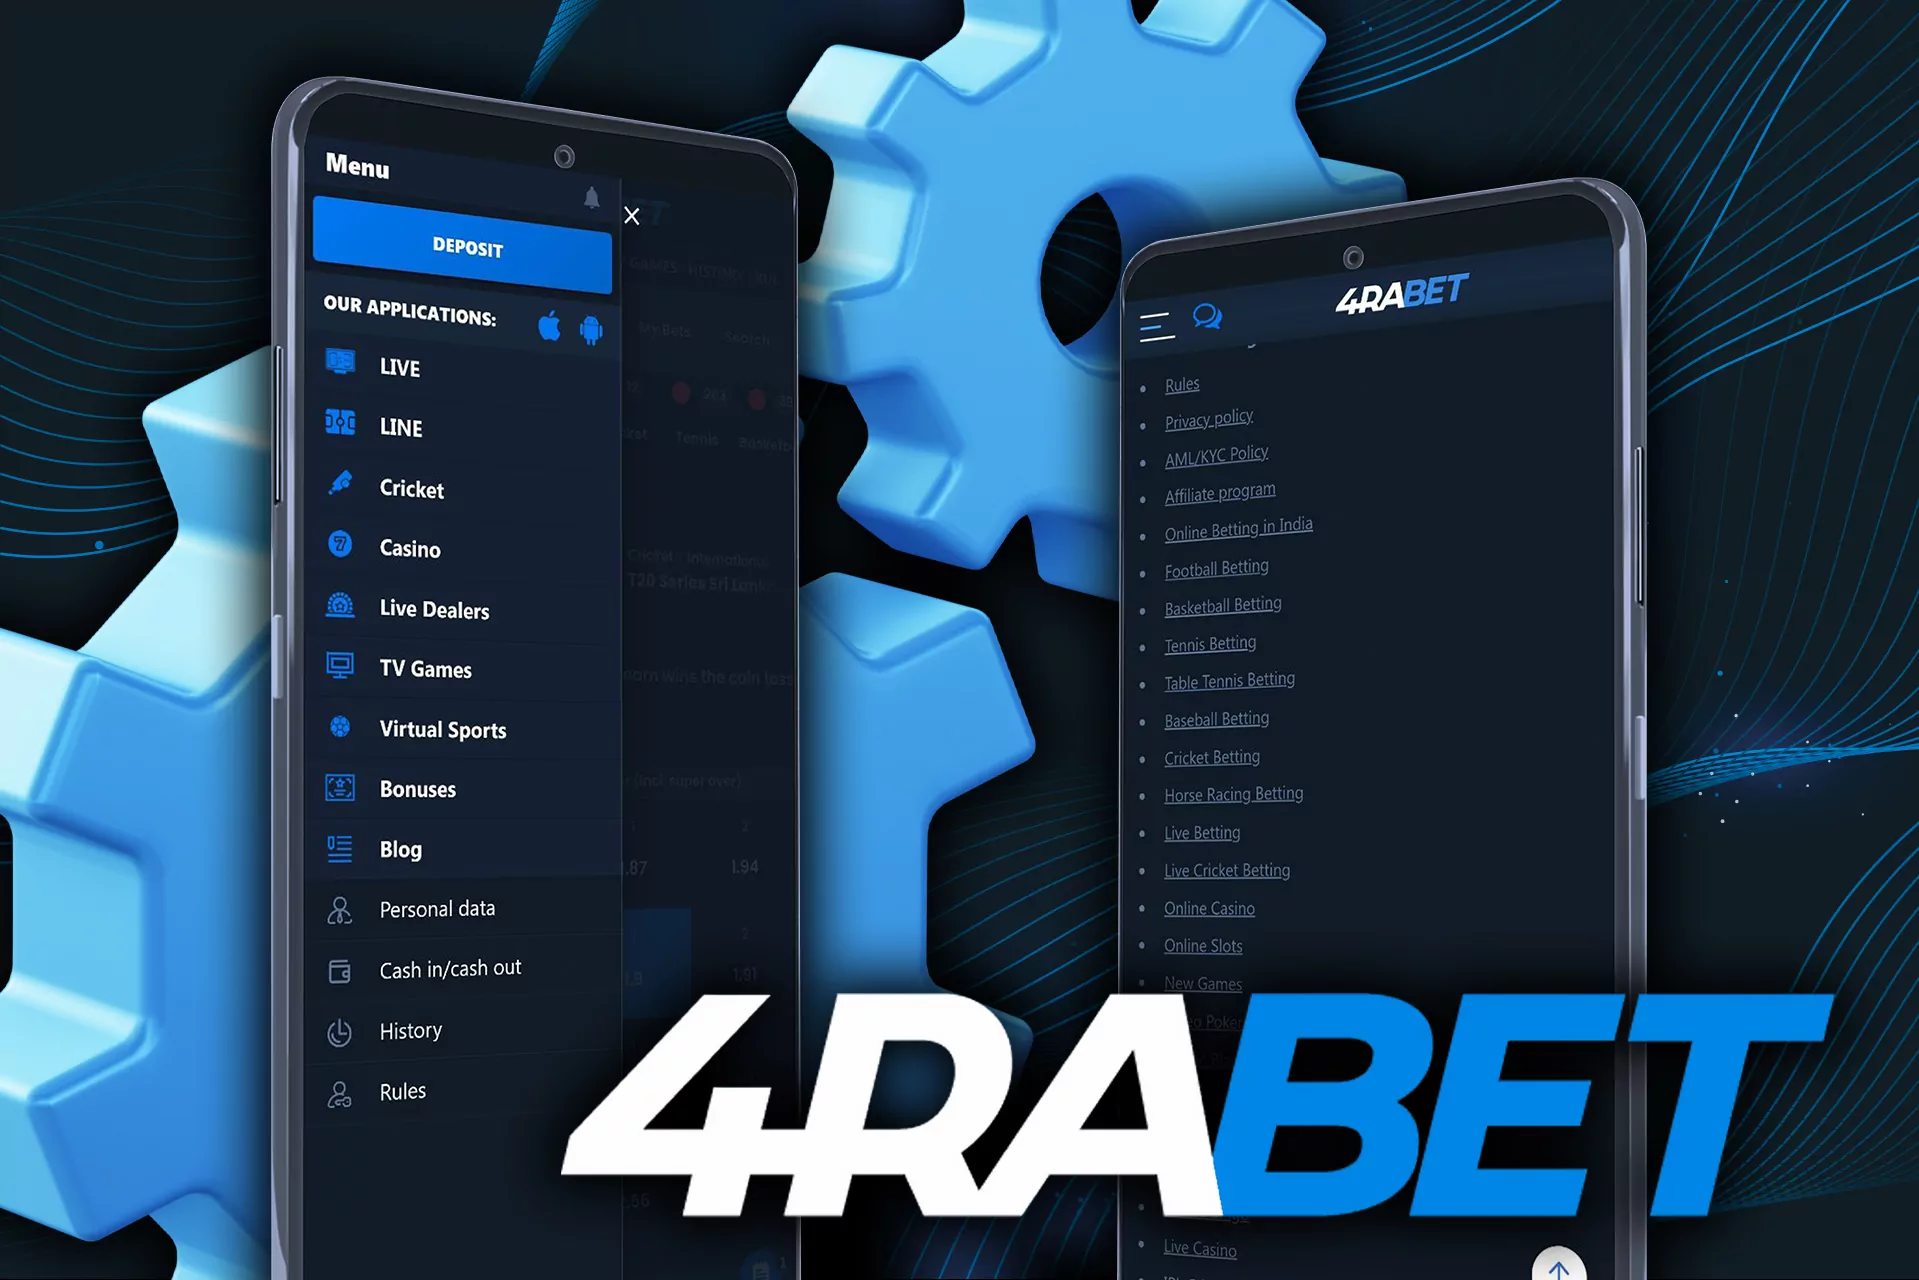 And that's not all the futures of the 4Rabet application. You can get acquainted with the full range of features by downloading the application.